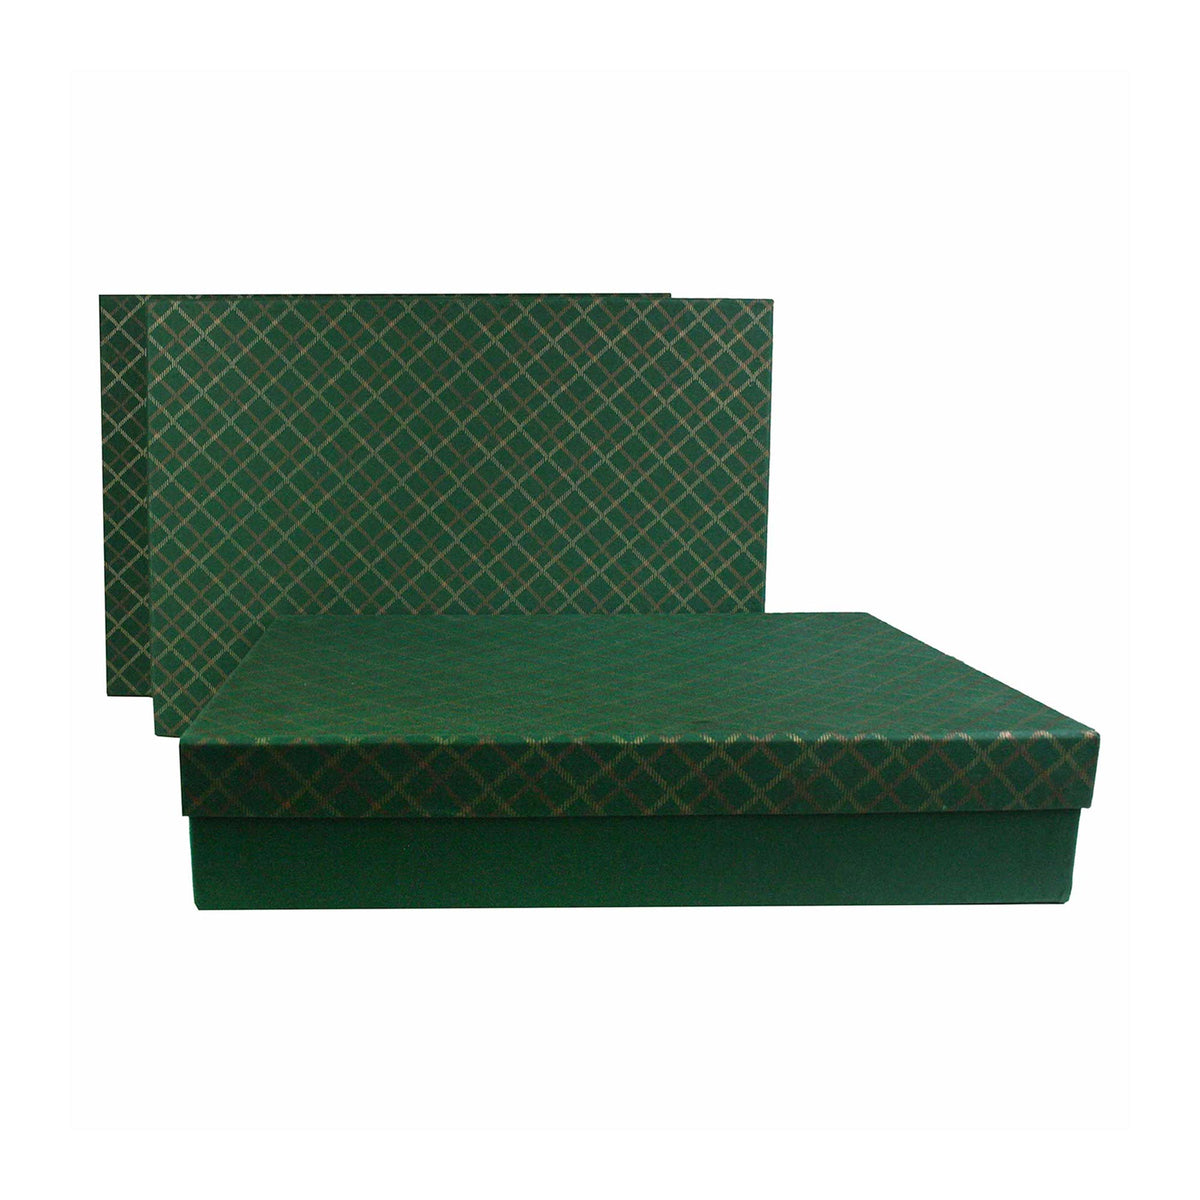 Set of 3 Handmade Green Chequered Gift Boxes